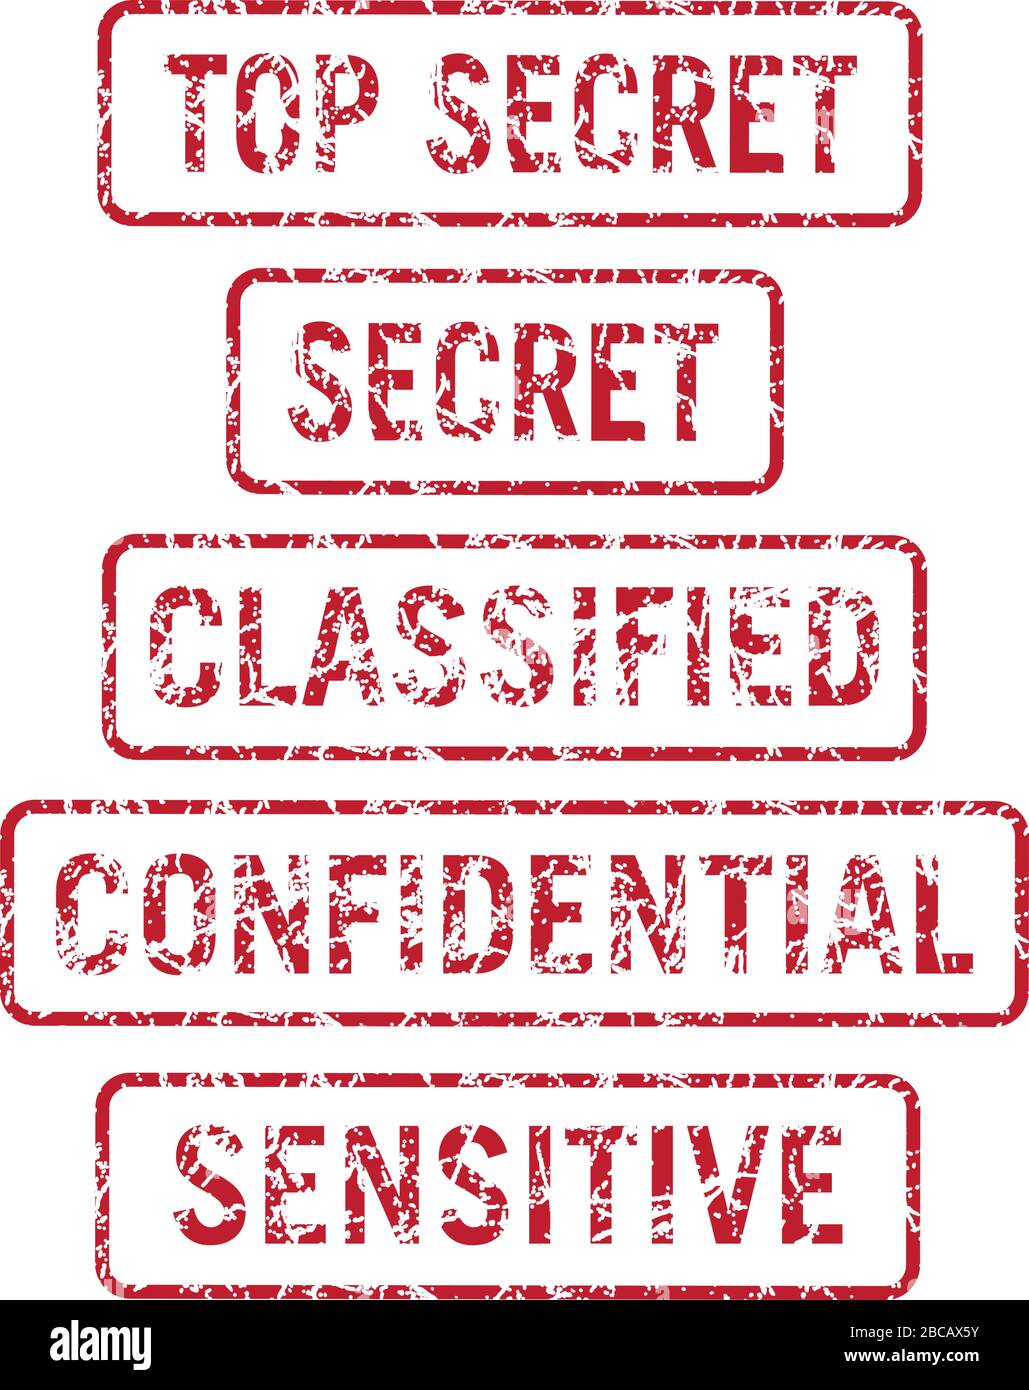 Information Security Top Secret, Secret, Classified, Confidential and Sensitive Stamps Distressed Isolated Vector Illustration Stock Vector